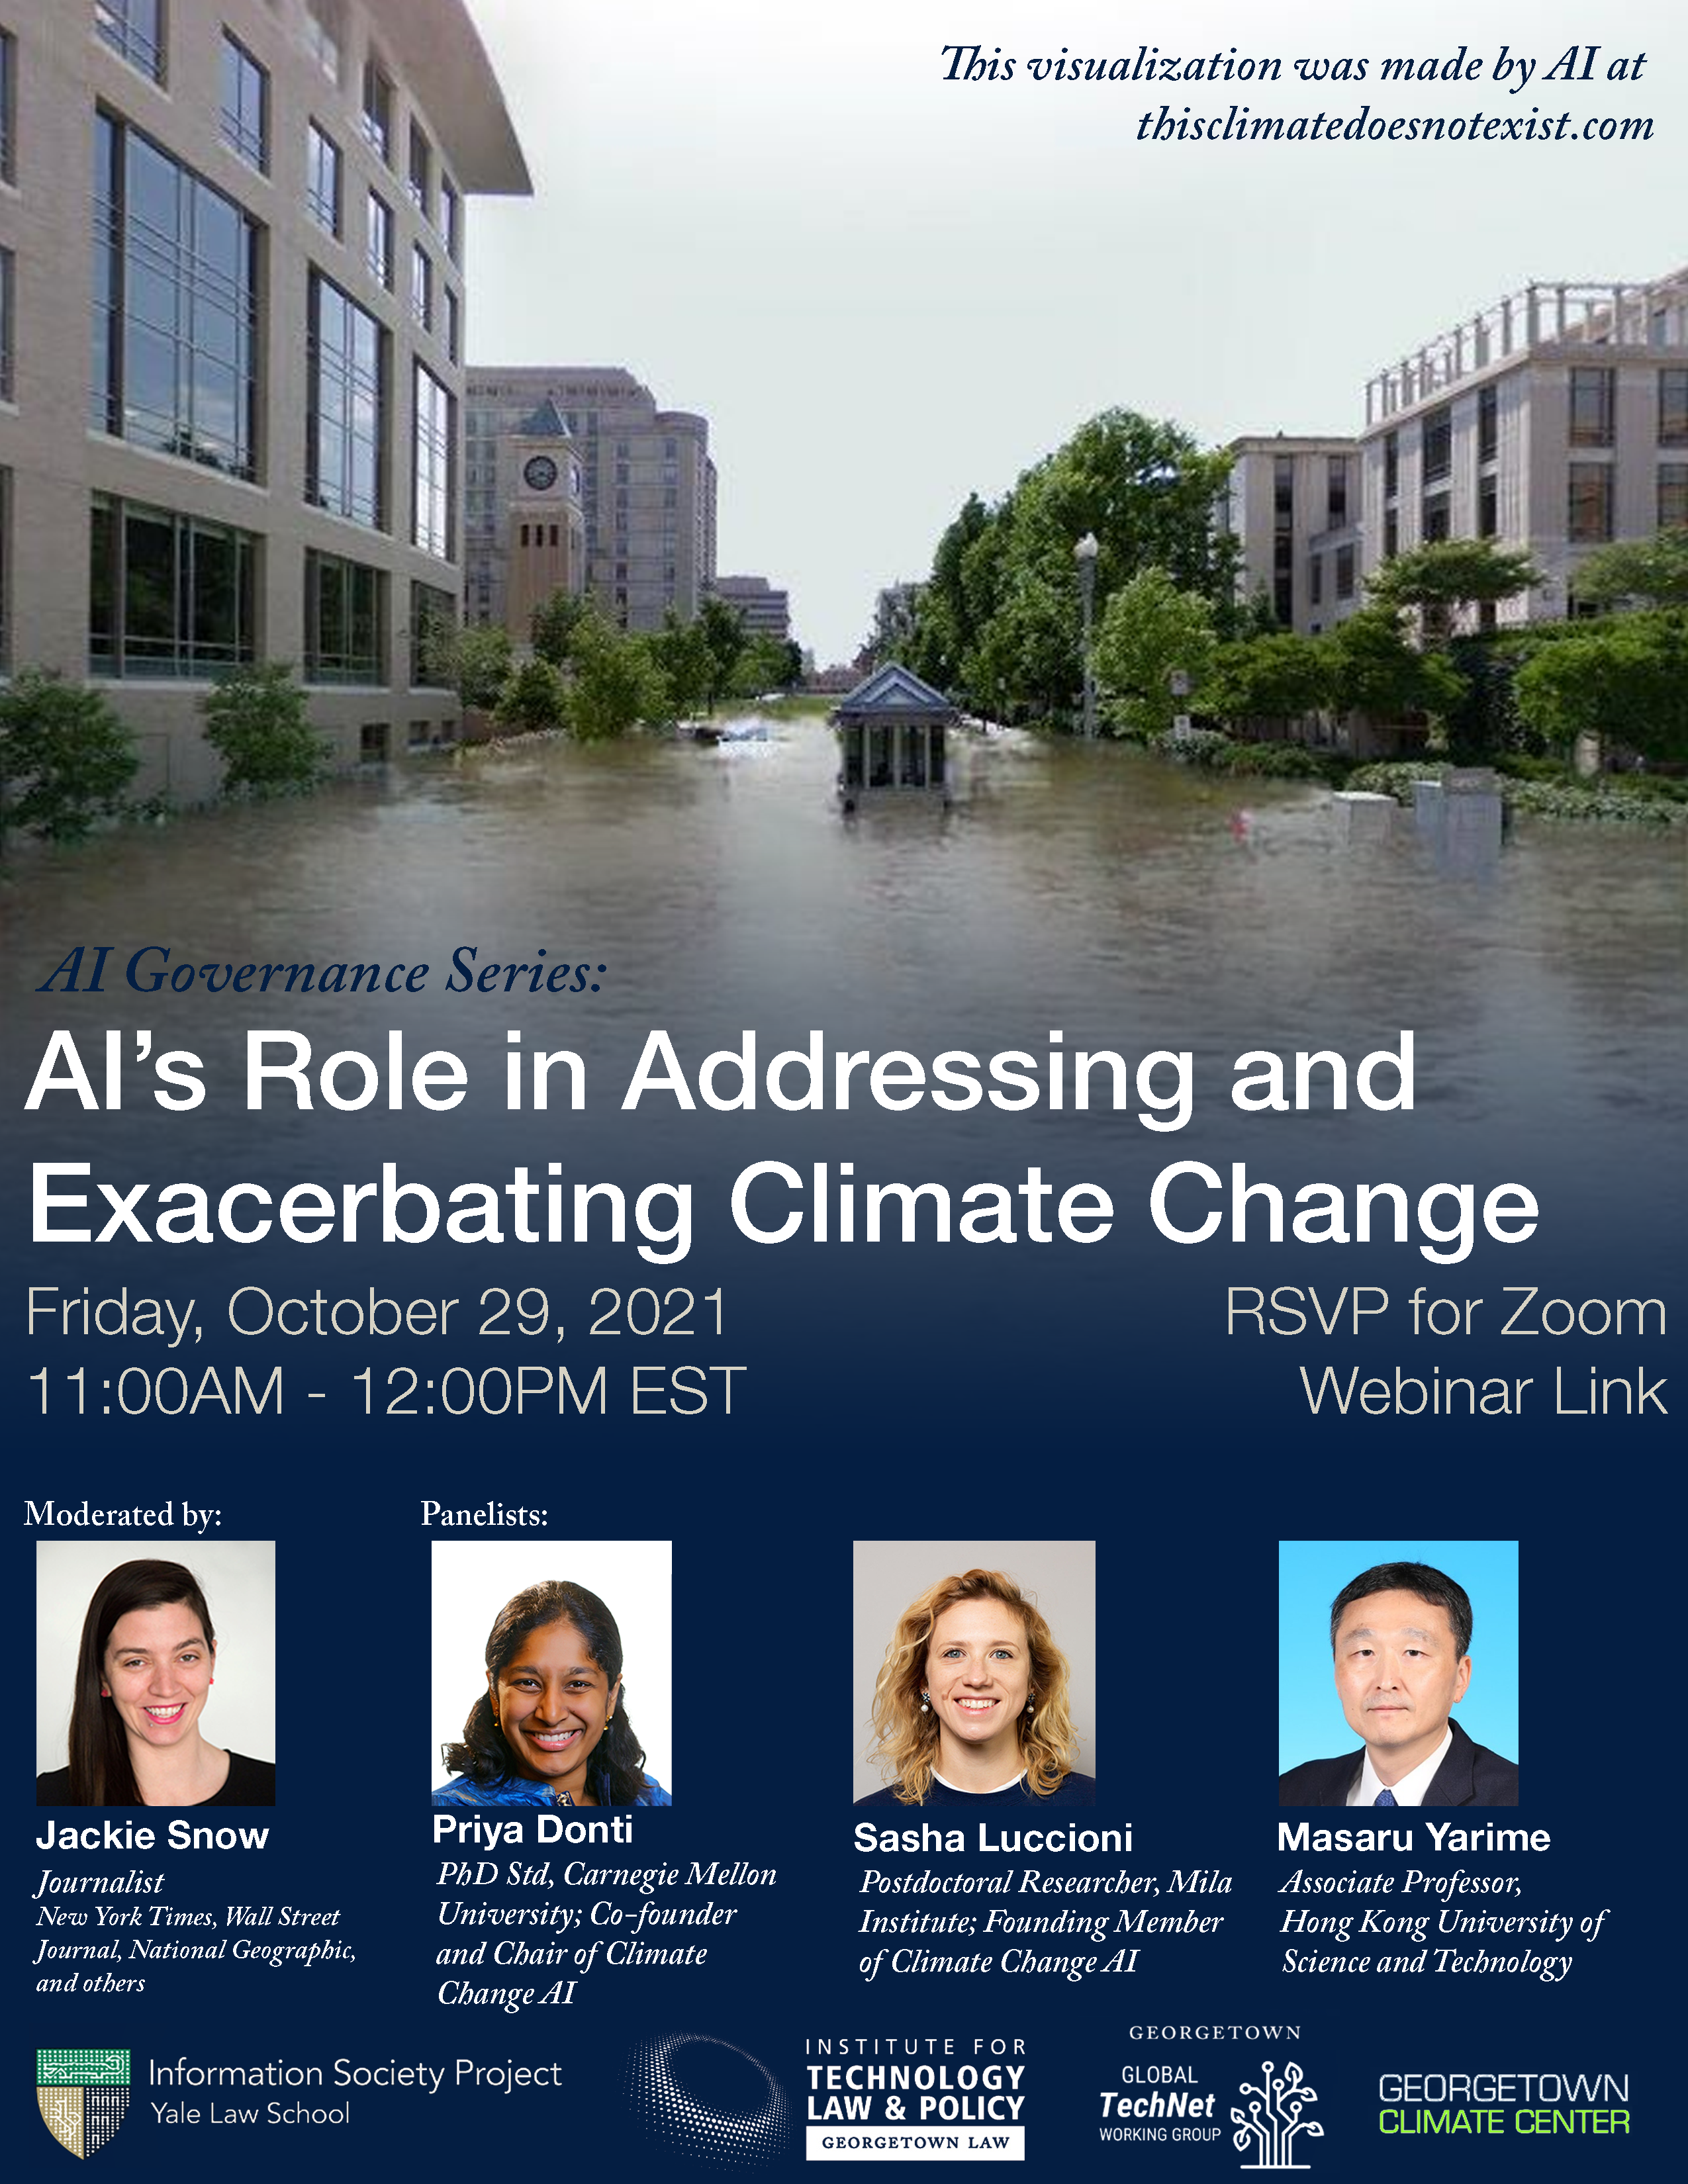 A Digital Flyer for the Event: AI's Role in Addressing and Exacerbating Climate Change